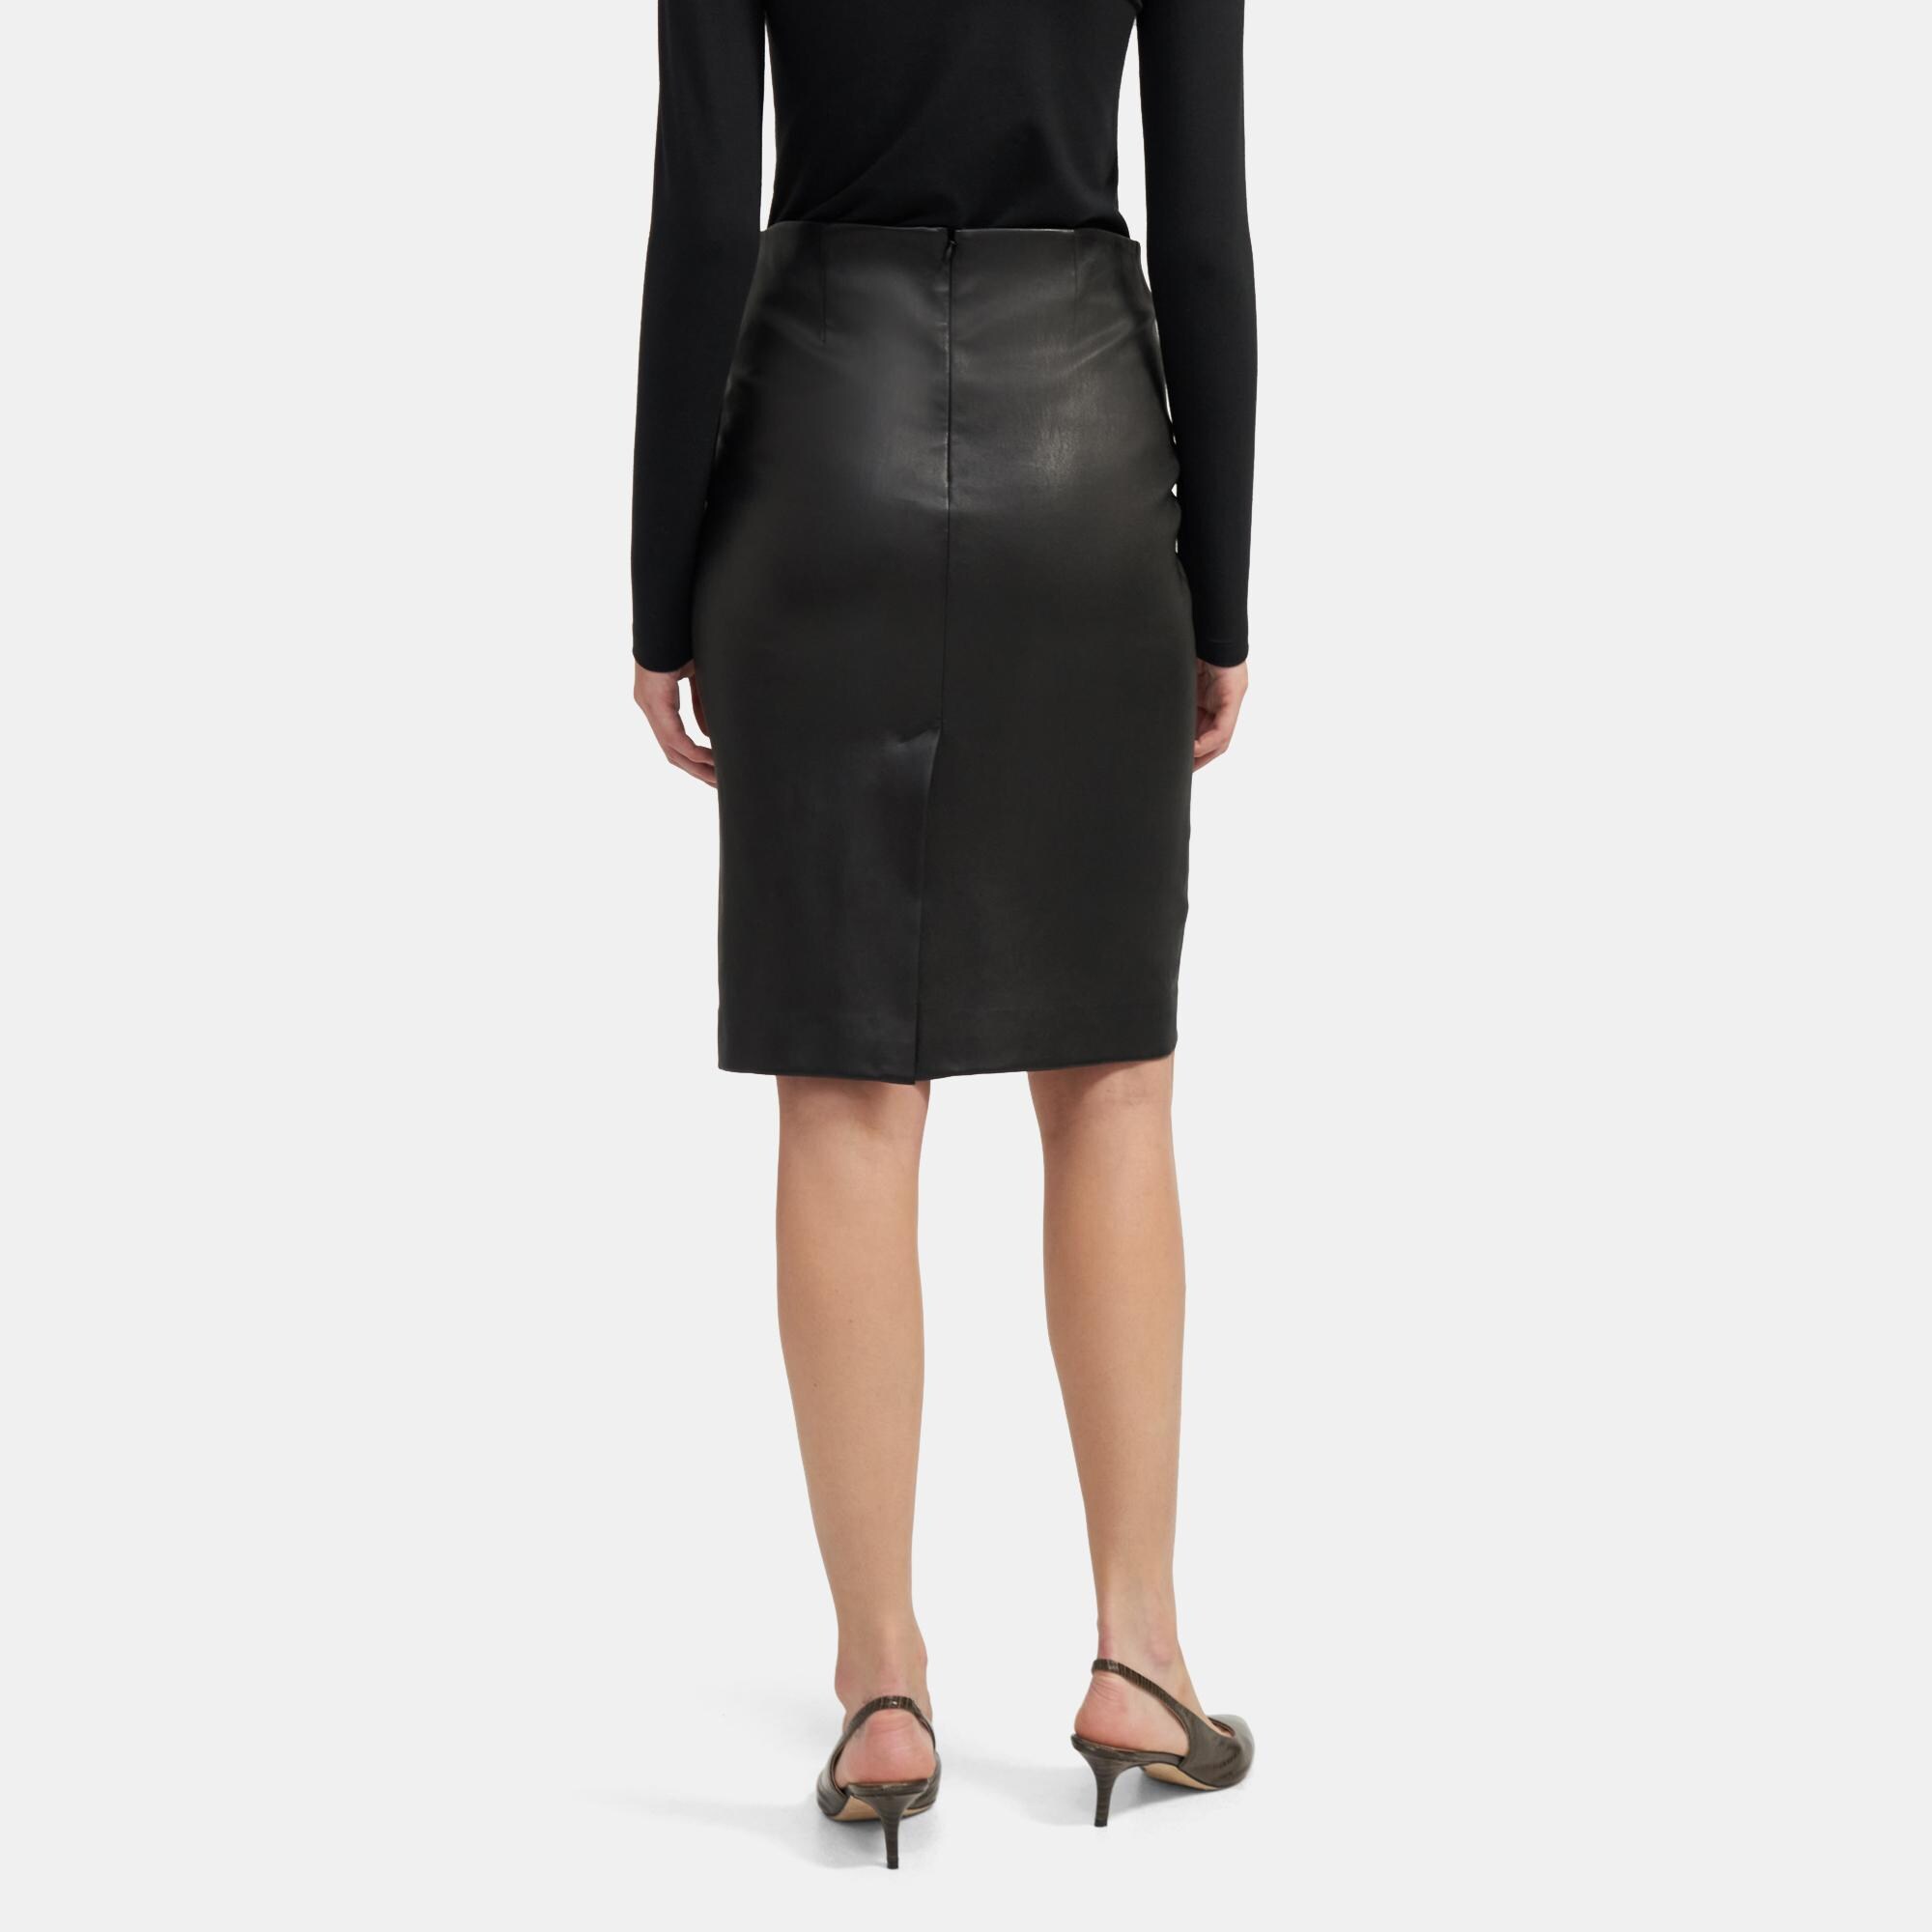 Theory Evia Asymmetric Pencil Skirt Women Skirts outlet store